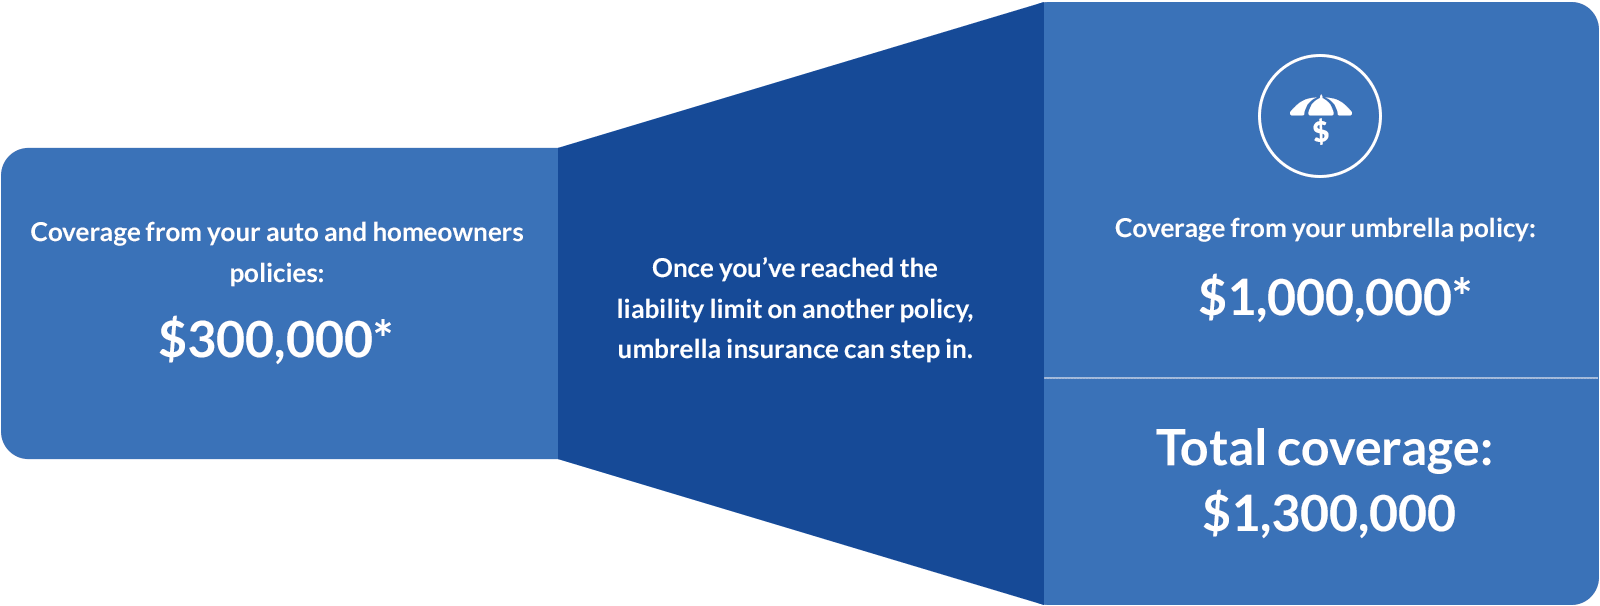 Once you've reached the liability limit on another policy, umbrella insurance can step in.